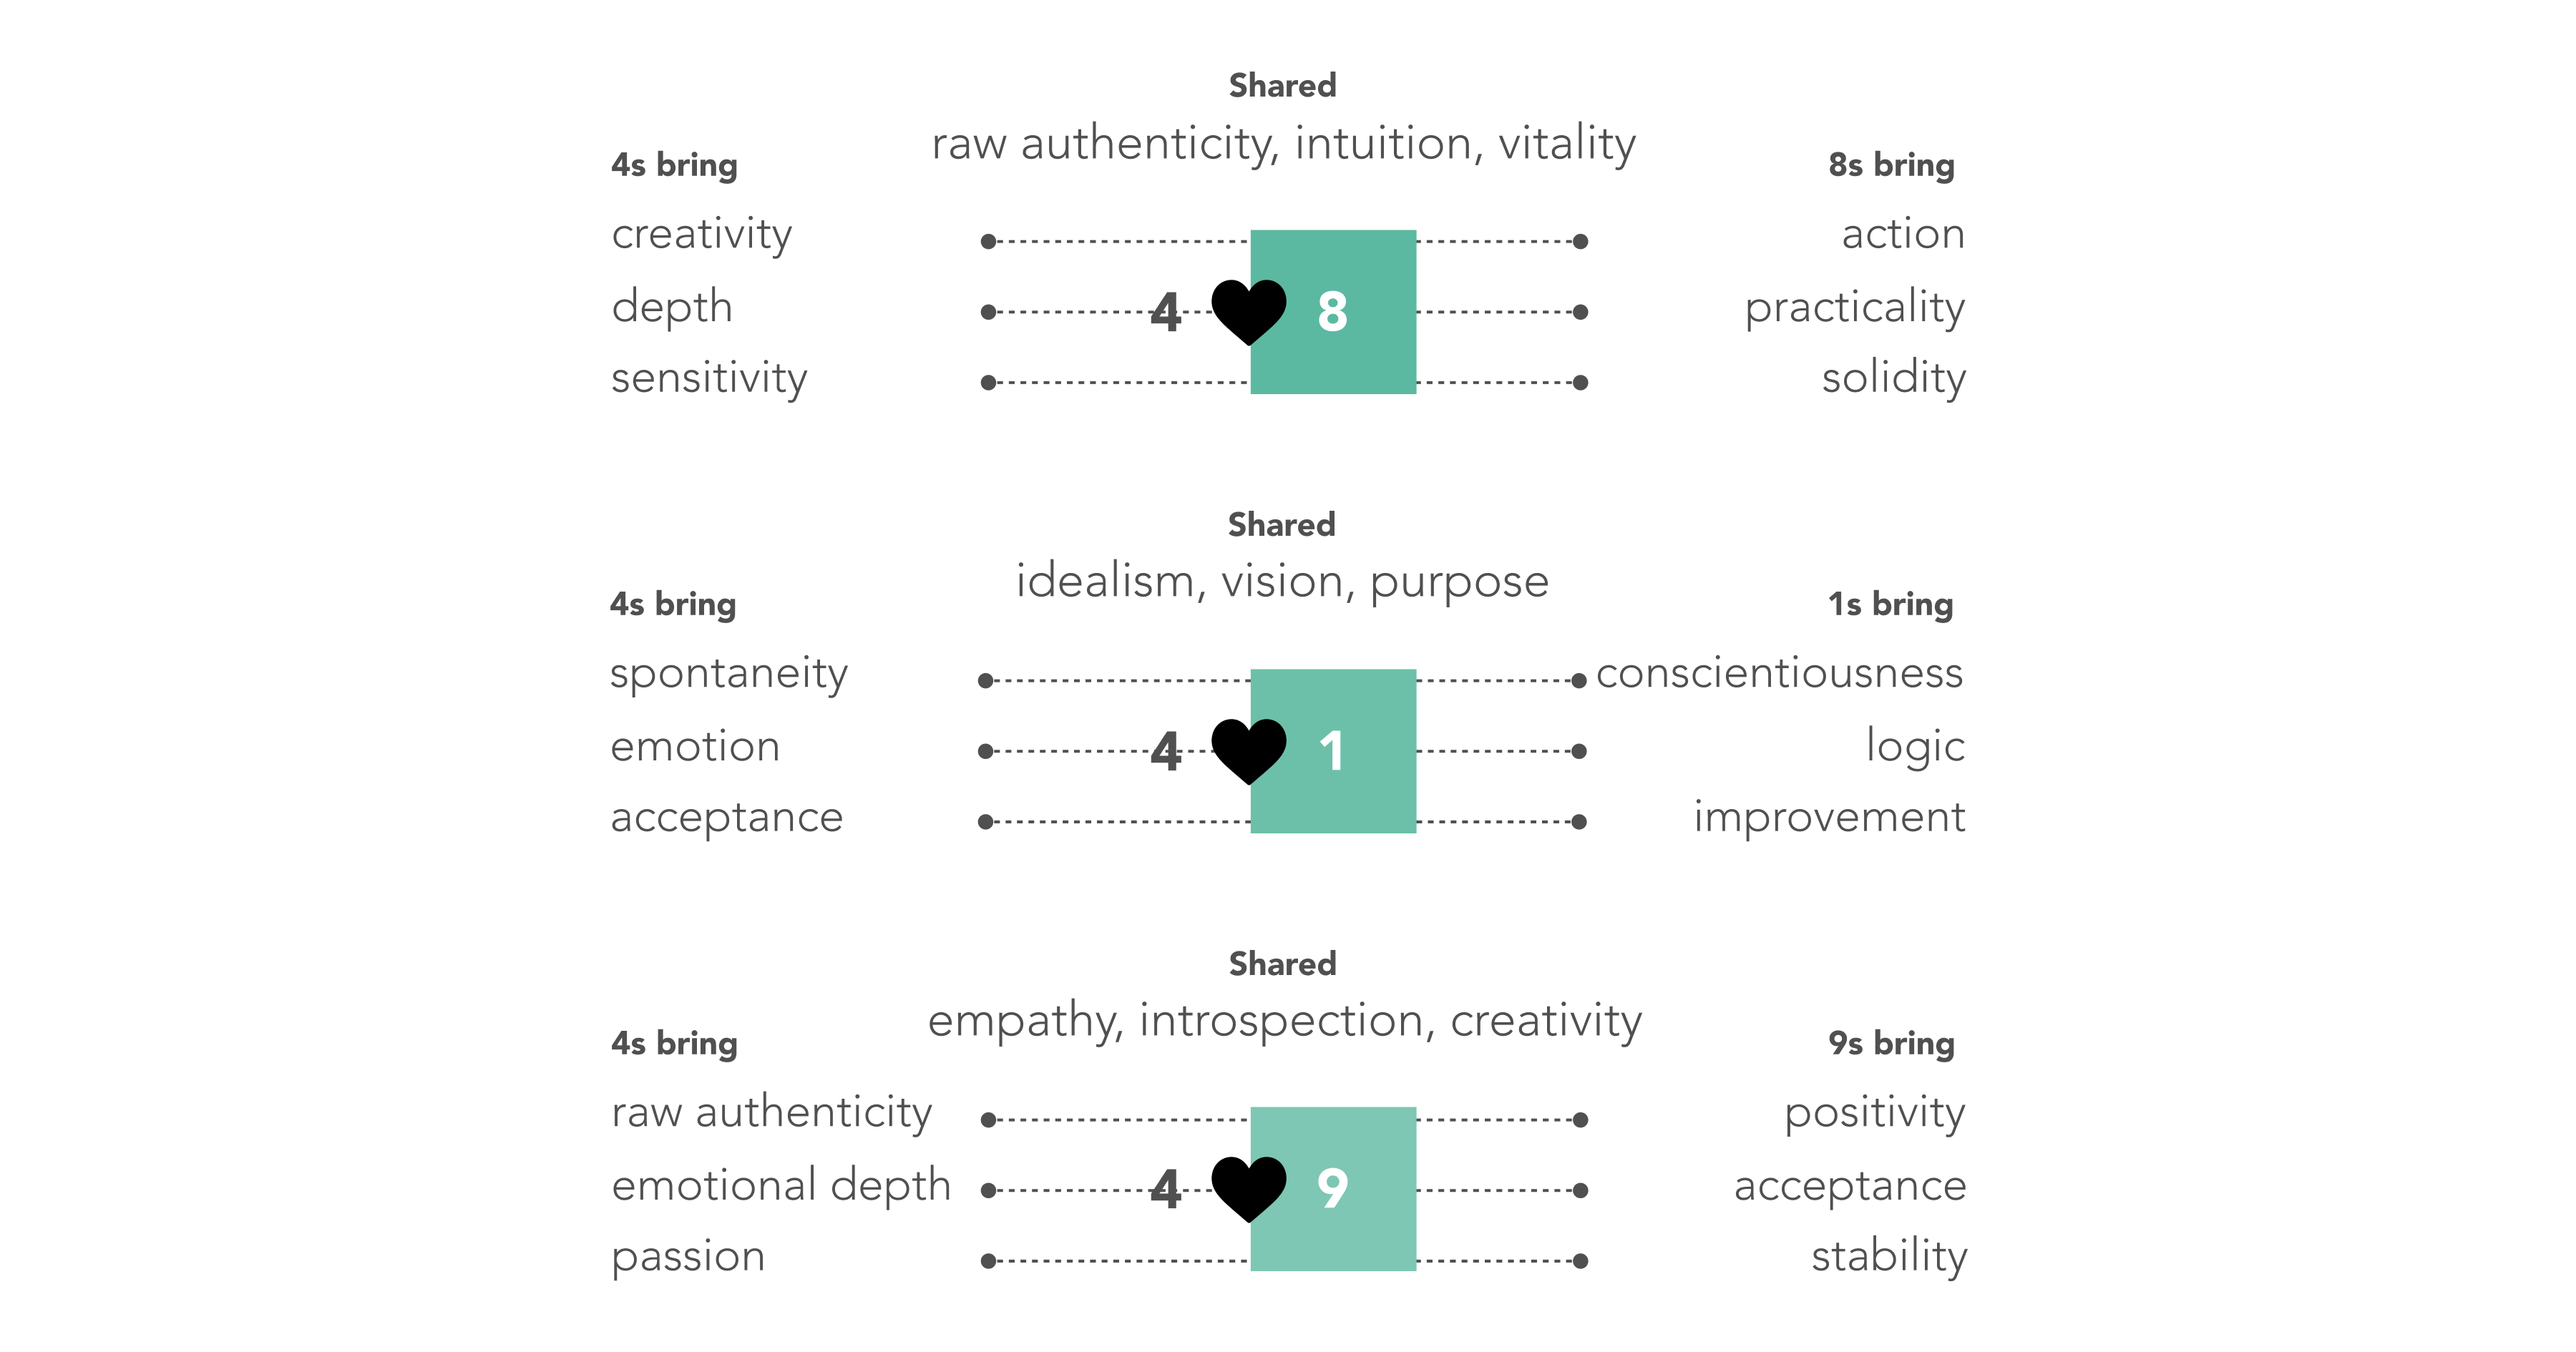 4s and 8s share raw authenticity, intuition, vitality. 4s bring creativity, depth, sensitivity, while 8s bring action, practicality, solidity. 4s and 1s share idealism, vision, purpose. 4s bring spontaneity, emotion, acceptance, while 1s bring conscientiousness, logic, improvement. 4s and 9s share empathy, introspection, creativity. 4s bring raw authenticity, emotional depth, passion, while 9s bring positivity, acceptance, stability.